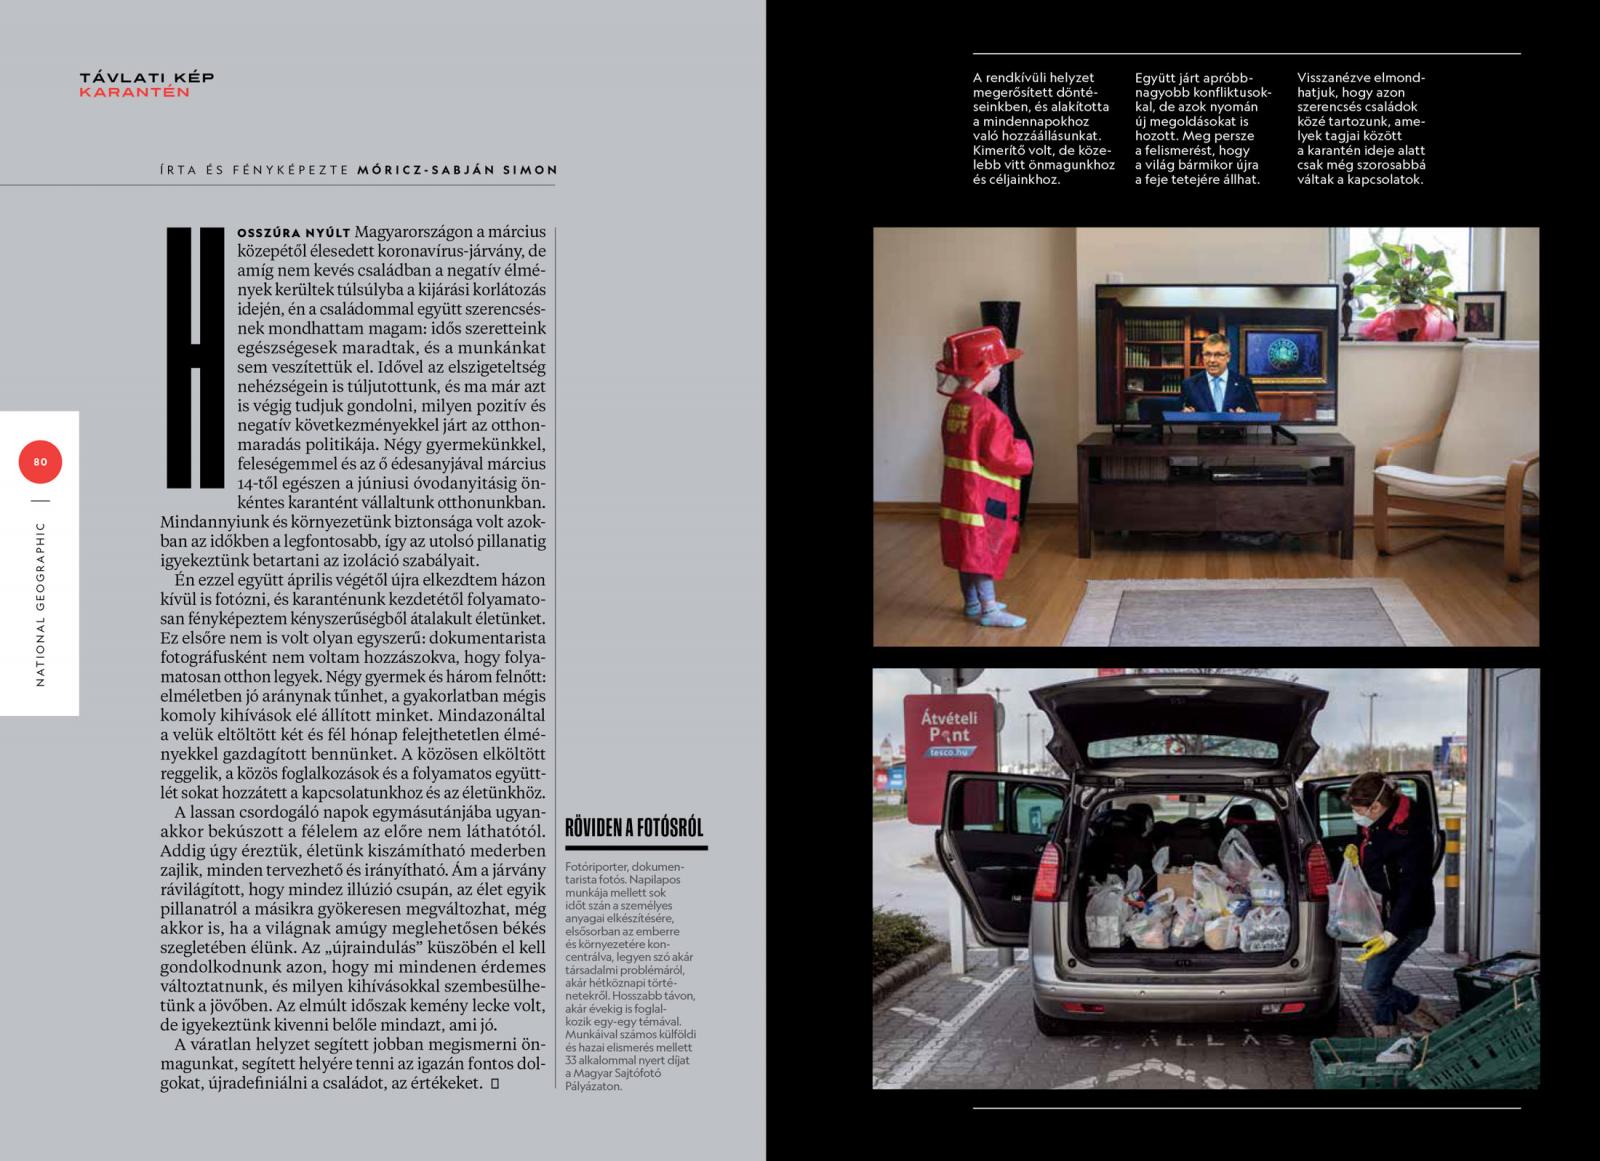 Quarantine and distancing in National Geographic Hungary magazine